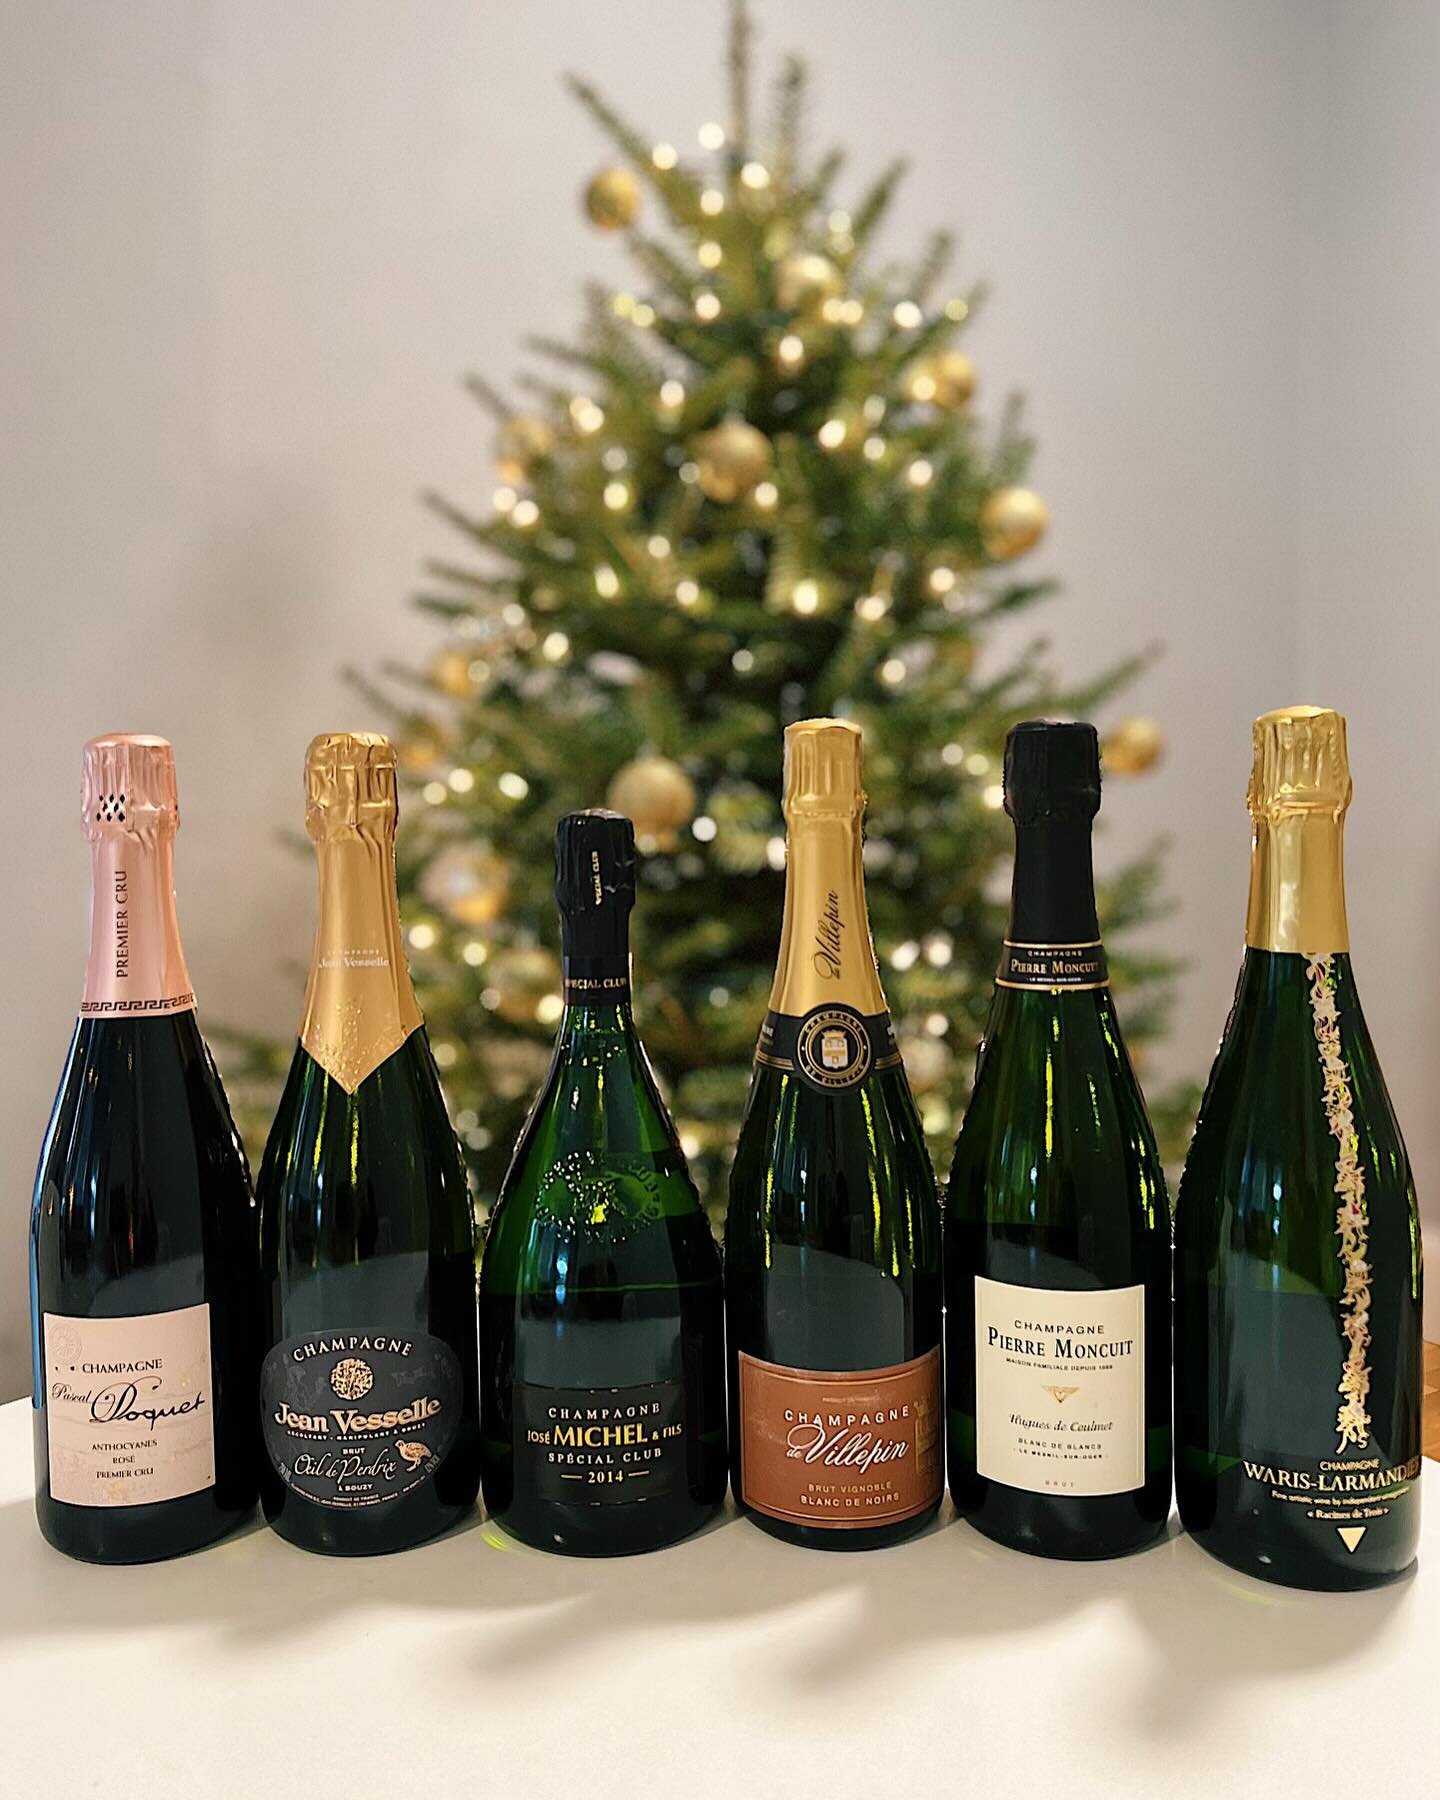 No matter what your plans are this New Year&rsquo;s Eve 🥂🎉 it&rsquo;s always great to have awesome Grower Champagnes on hand. We&rsquo;ve curated a stunning Grower Champagne 6-bottle set with delivery to your door this Friday or Saturday.* With thi